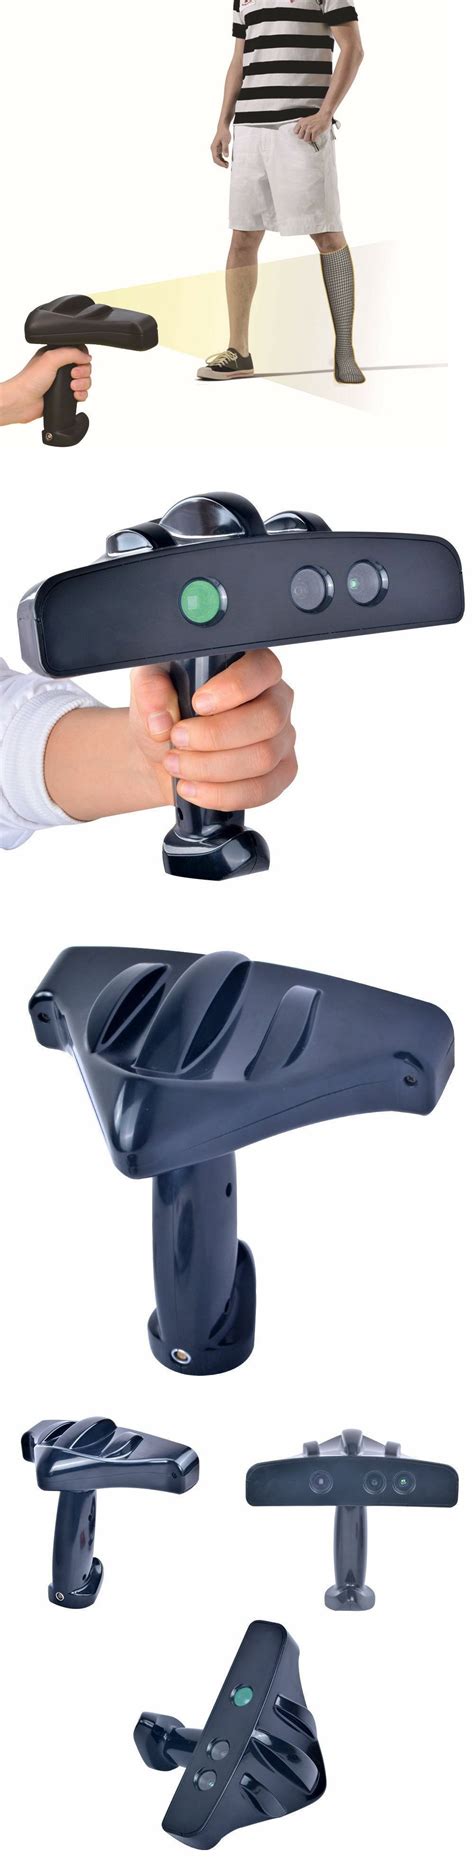 Seller hub gives you tools to: 3D Scanners 183064: Portable Handheld 3D Scanner For 3D ...